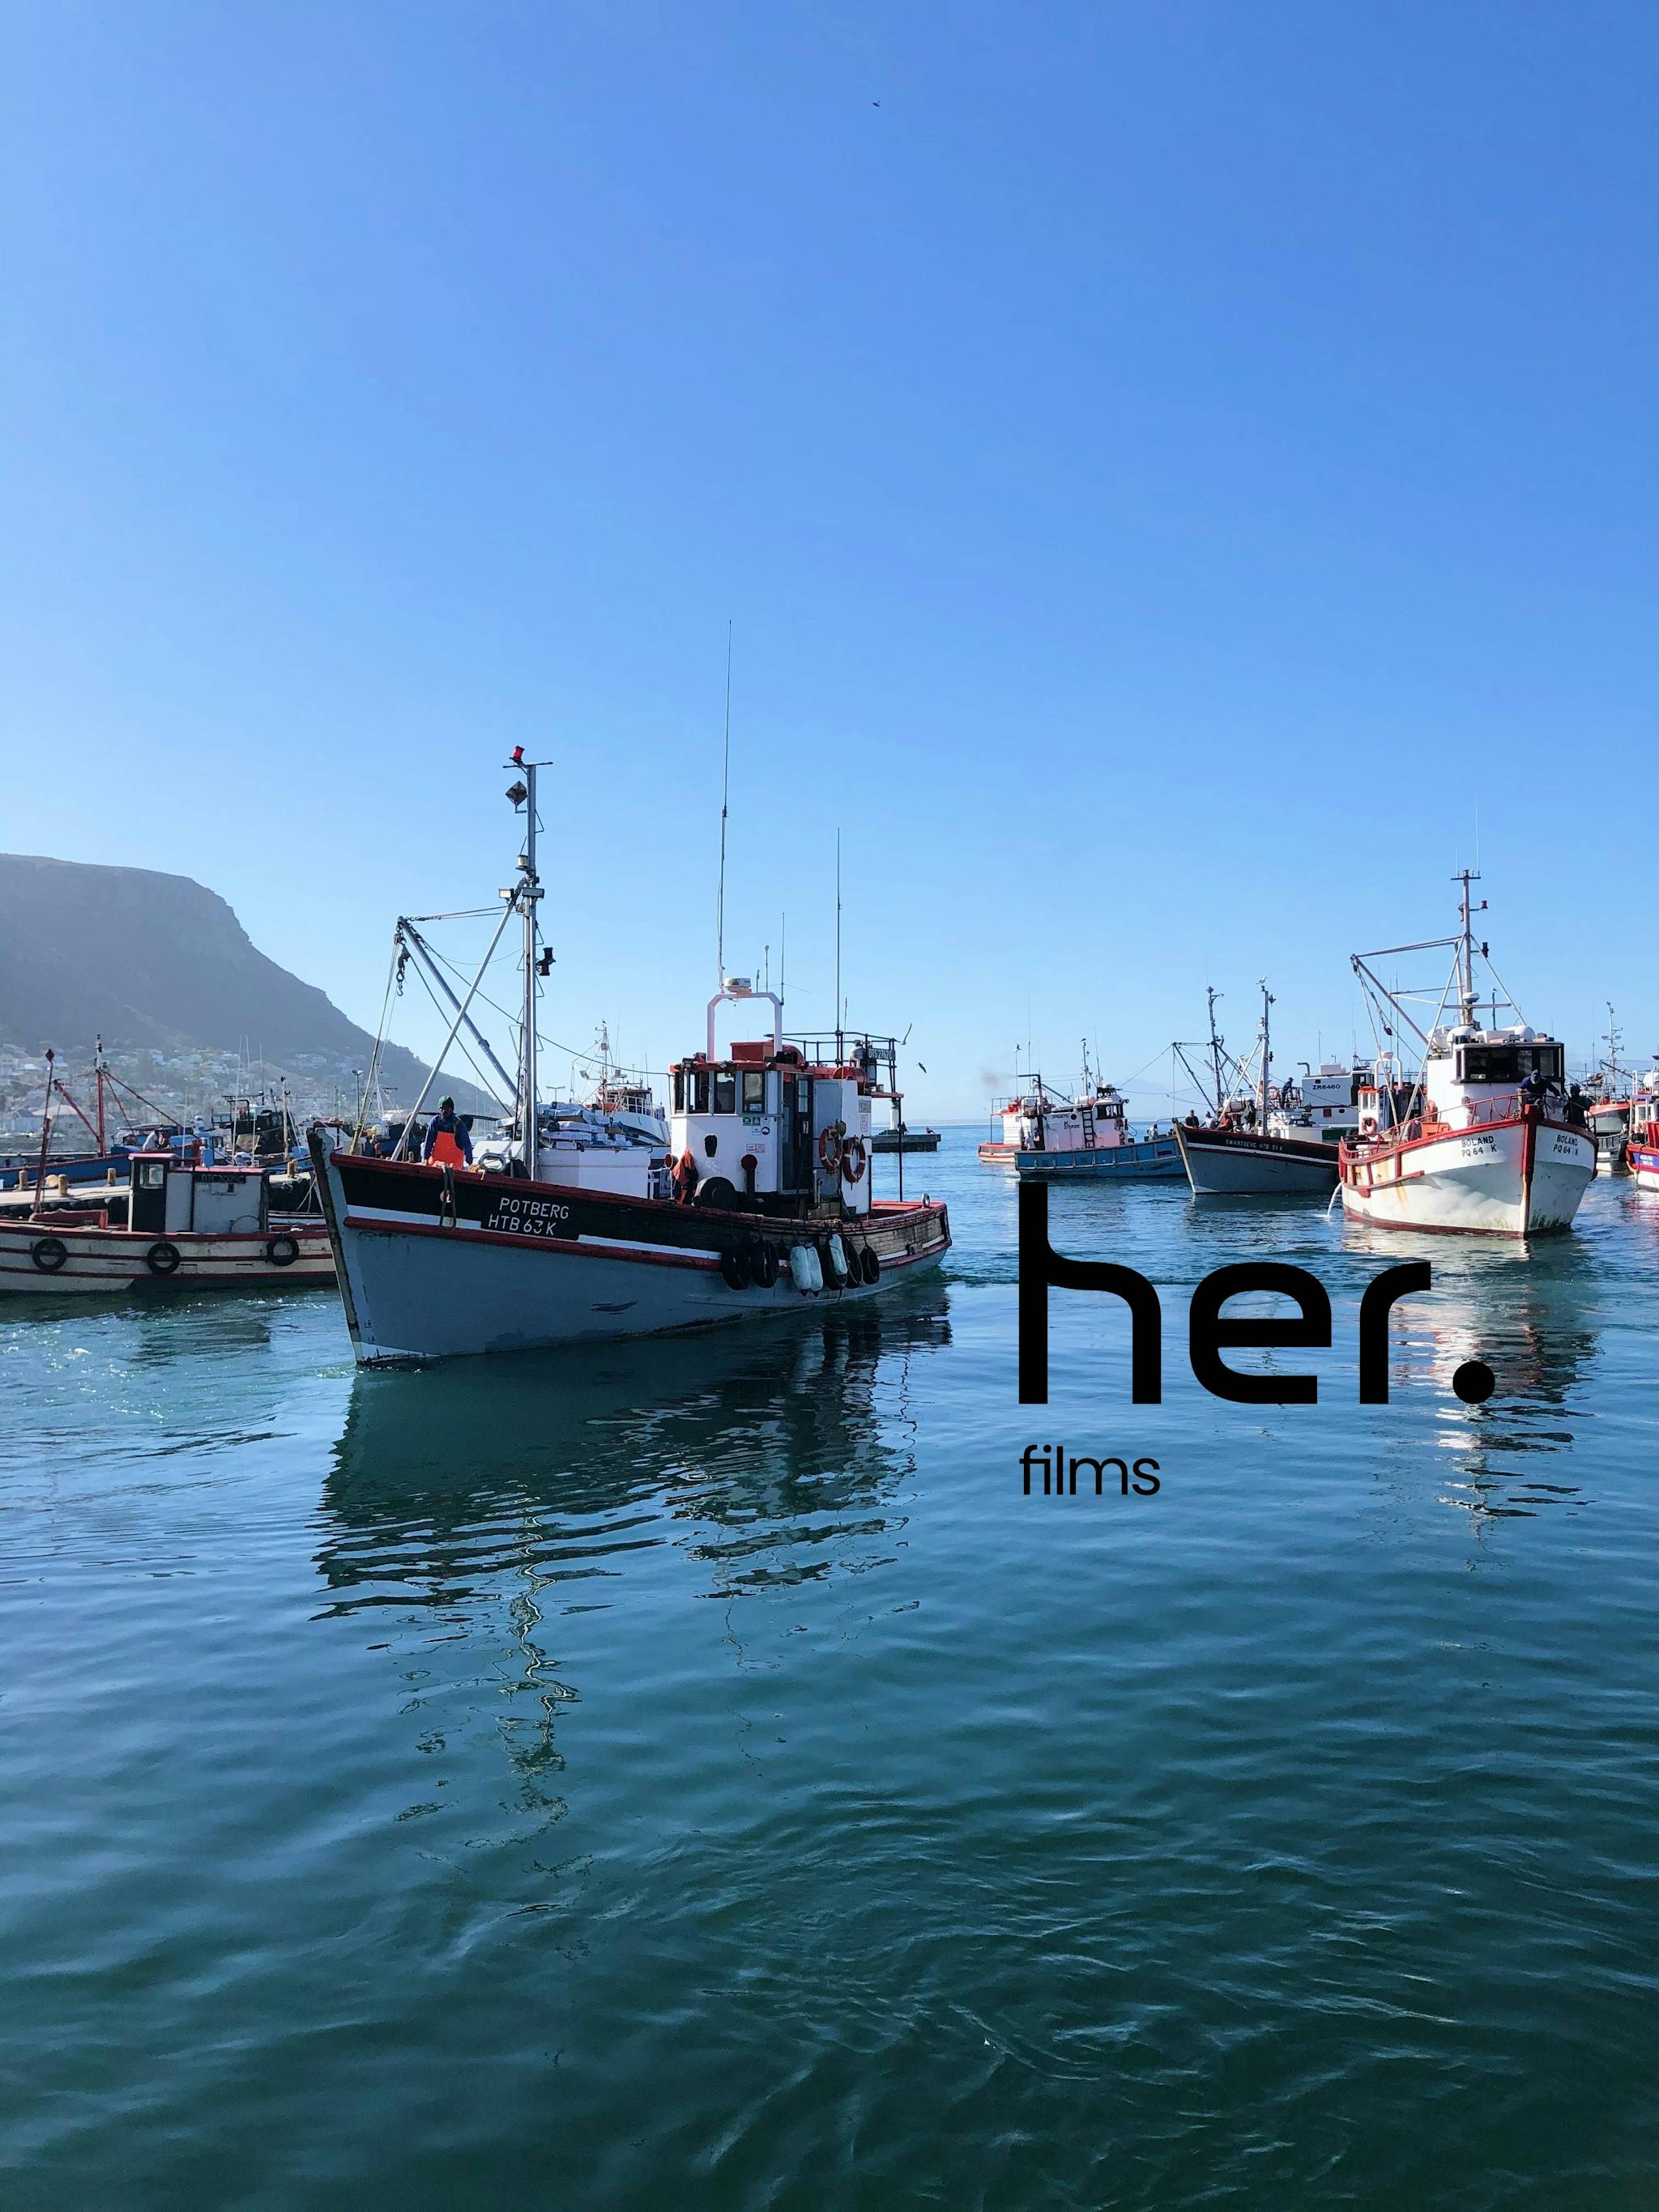 Her Films - Cape Town Guide